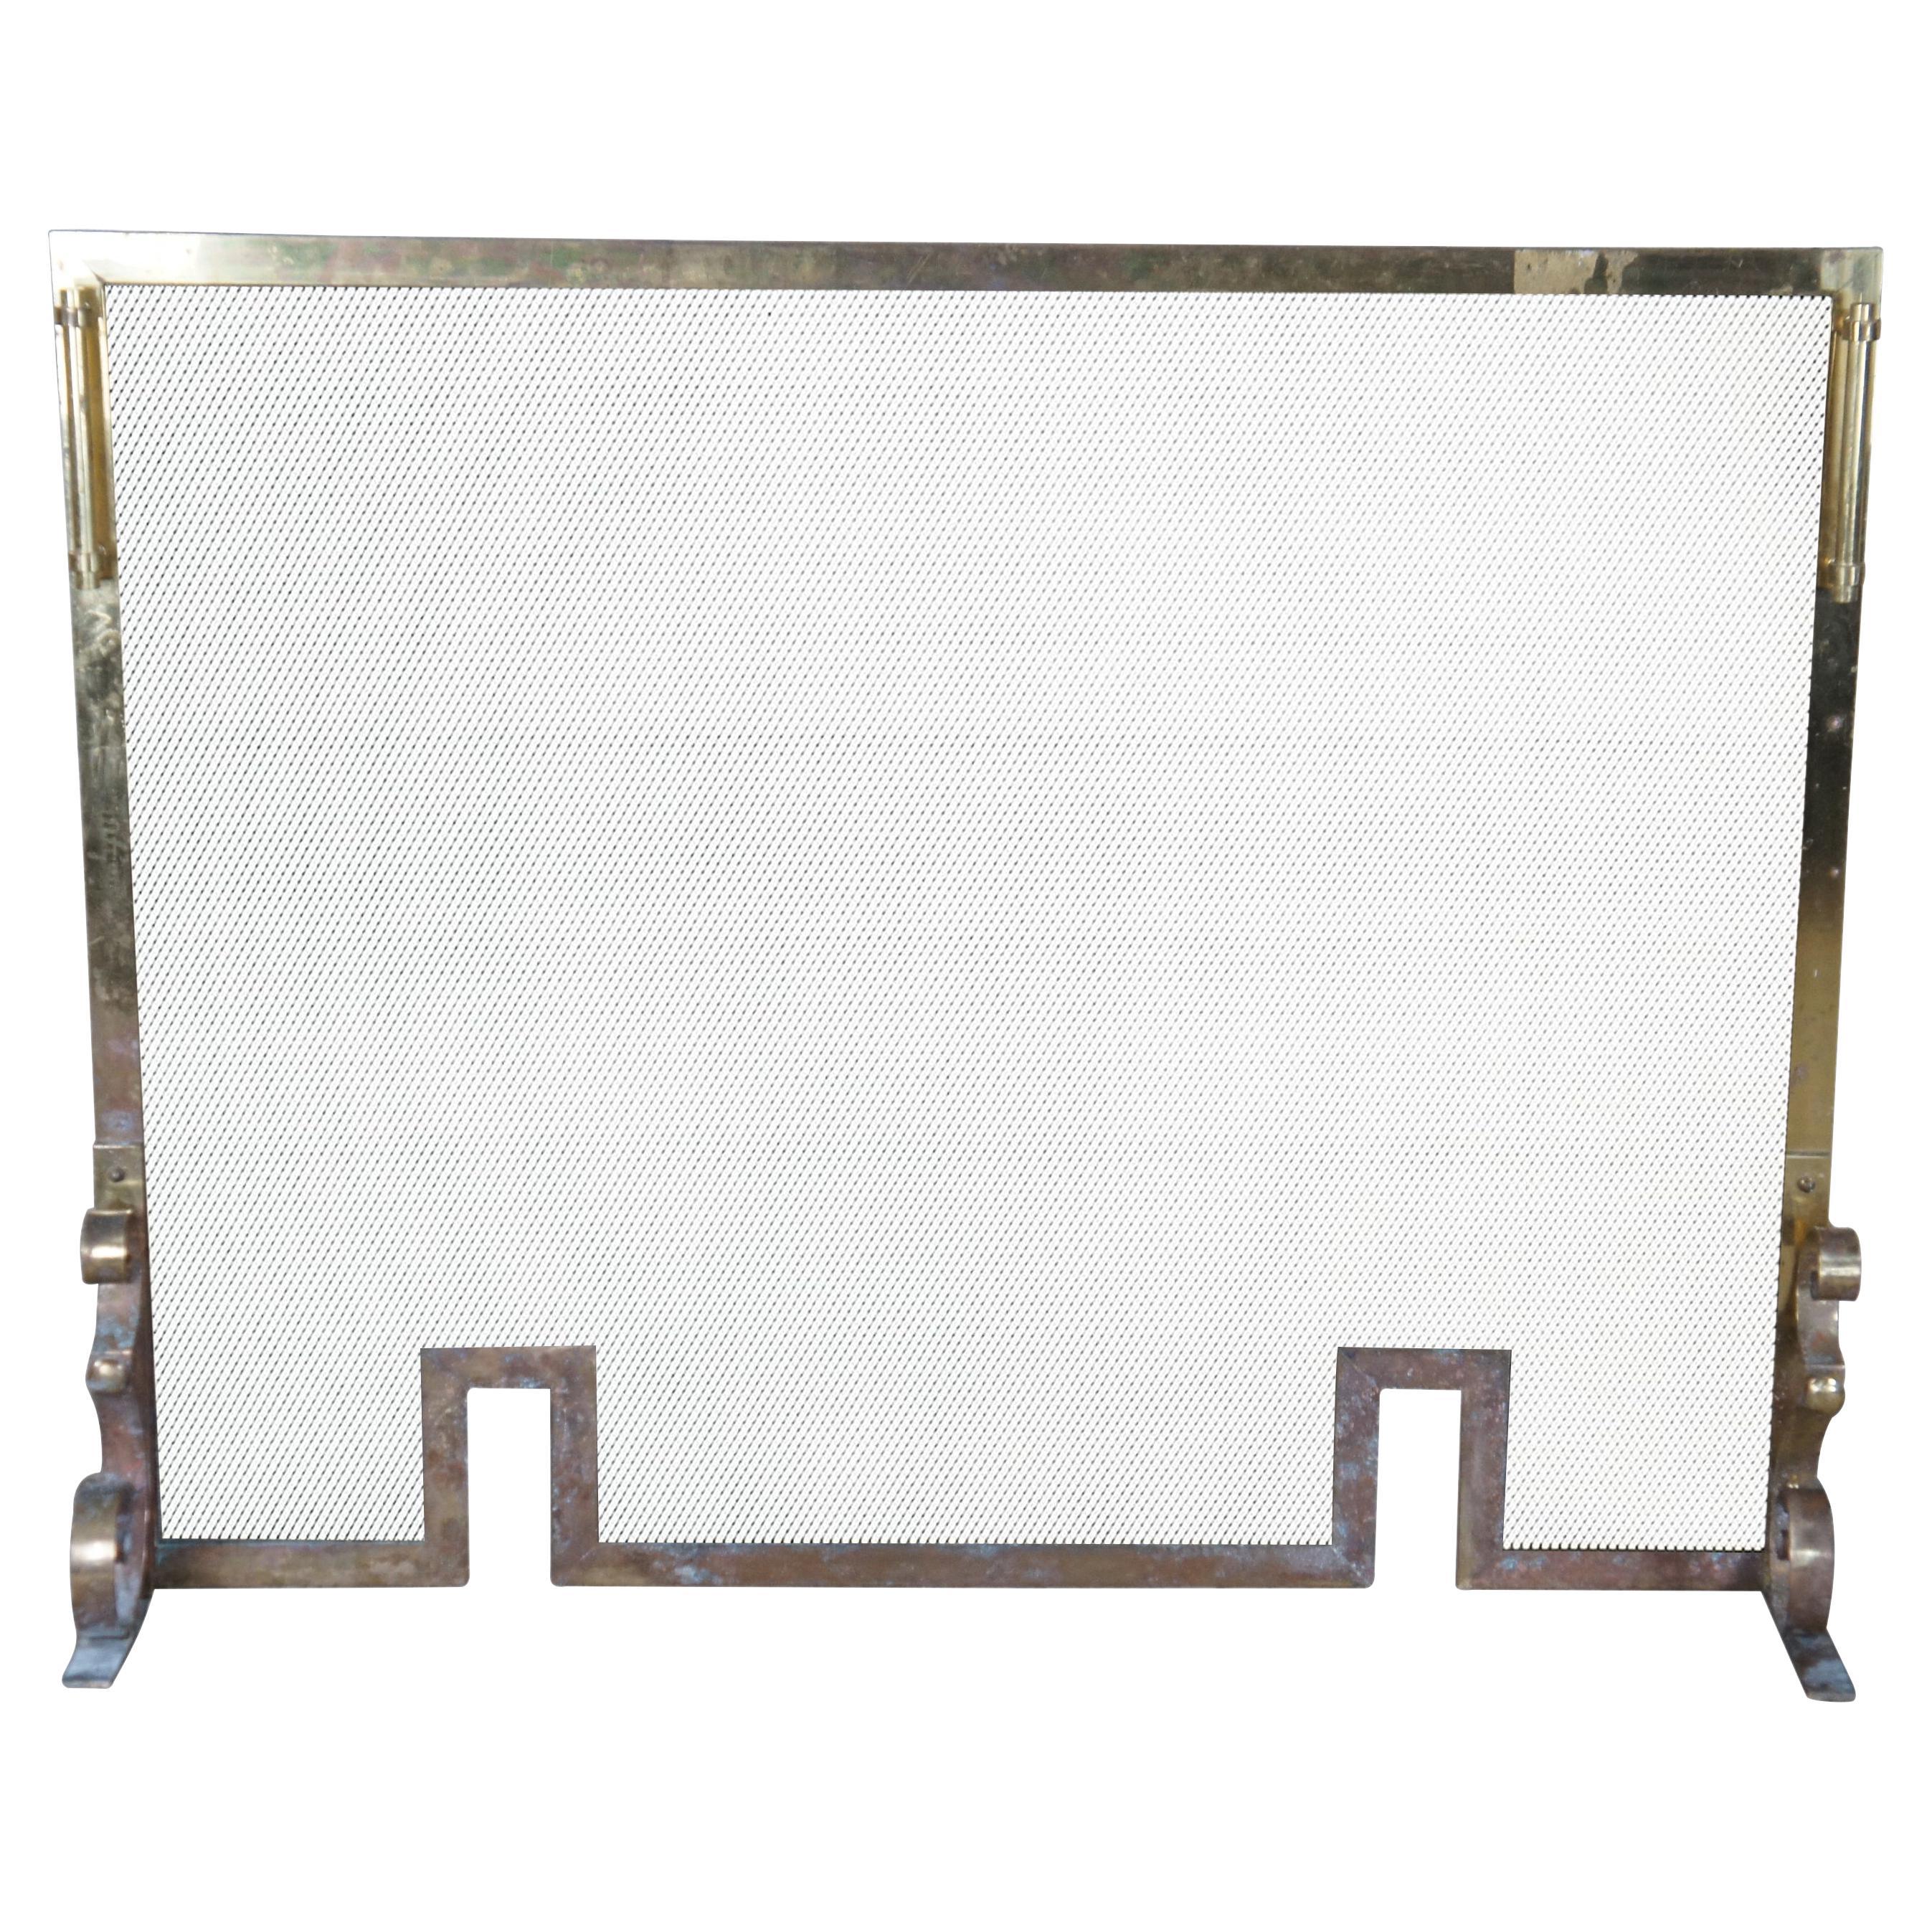 Vintage Hollywood Regency Scrolled Brass & Mesh Fireplace Hearthware Screen 37" For Sale